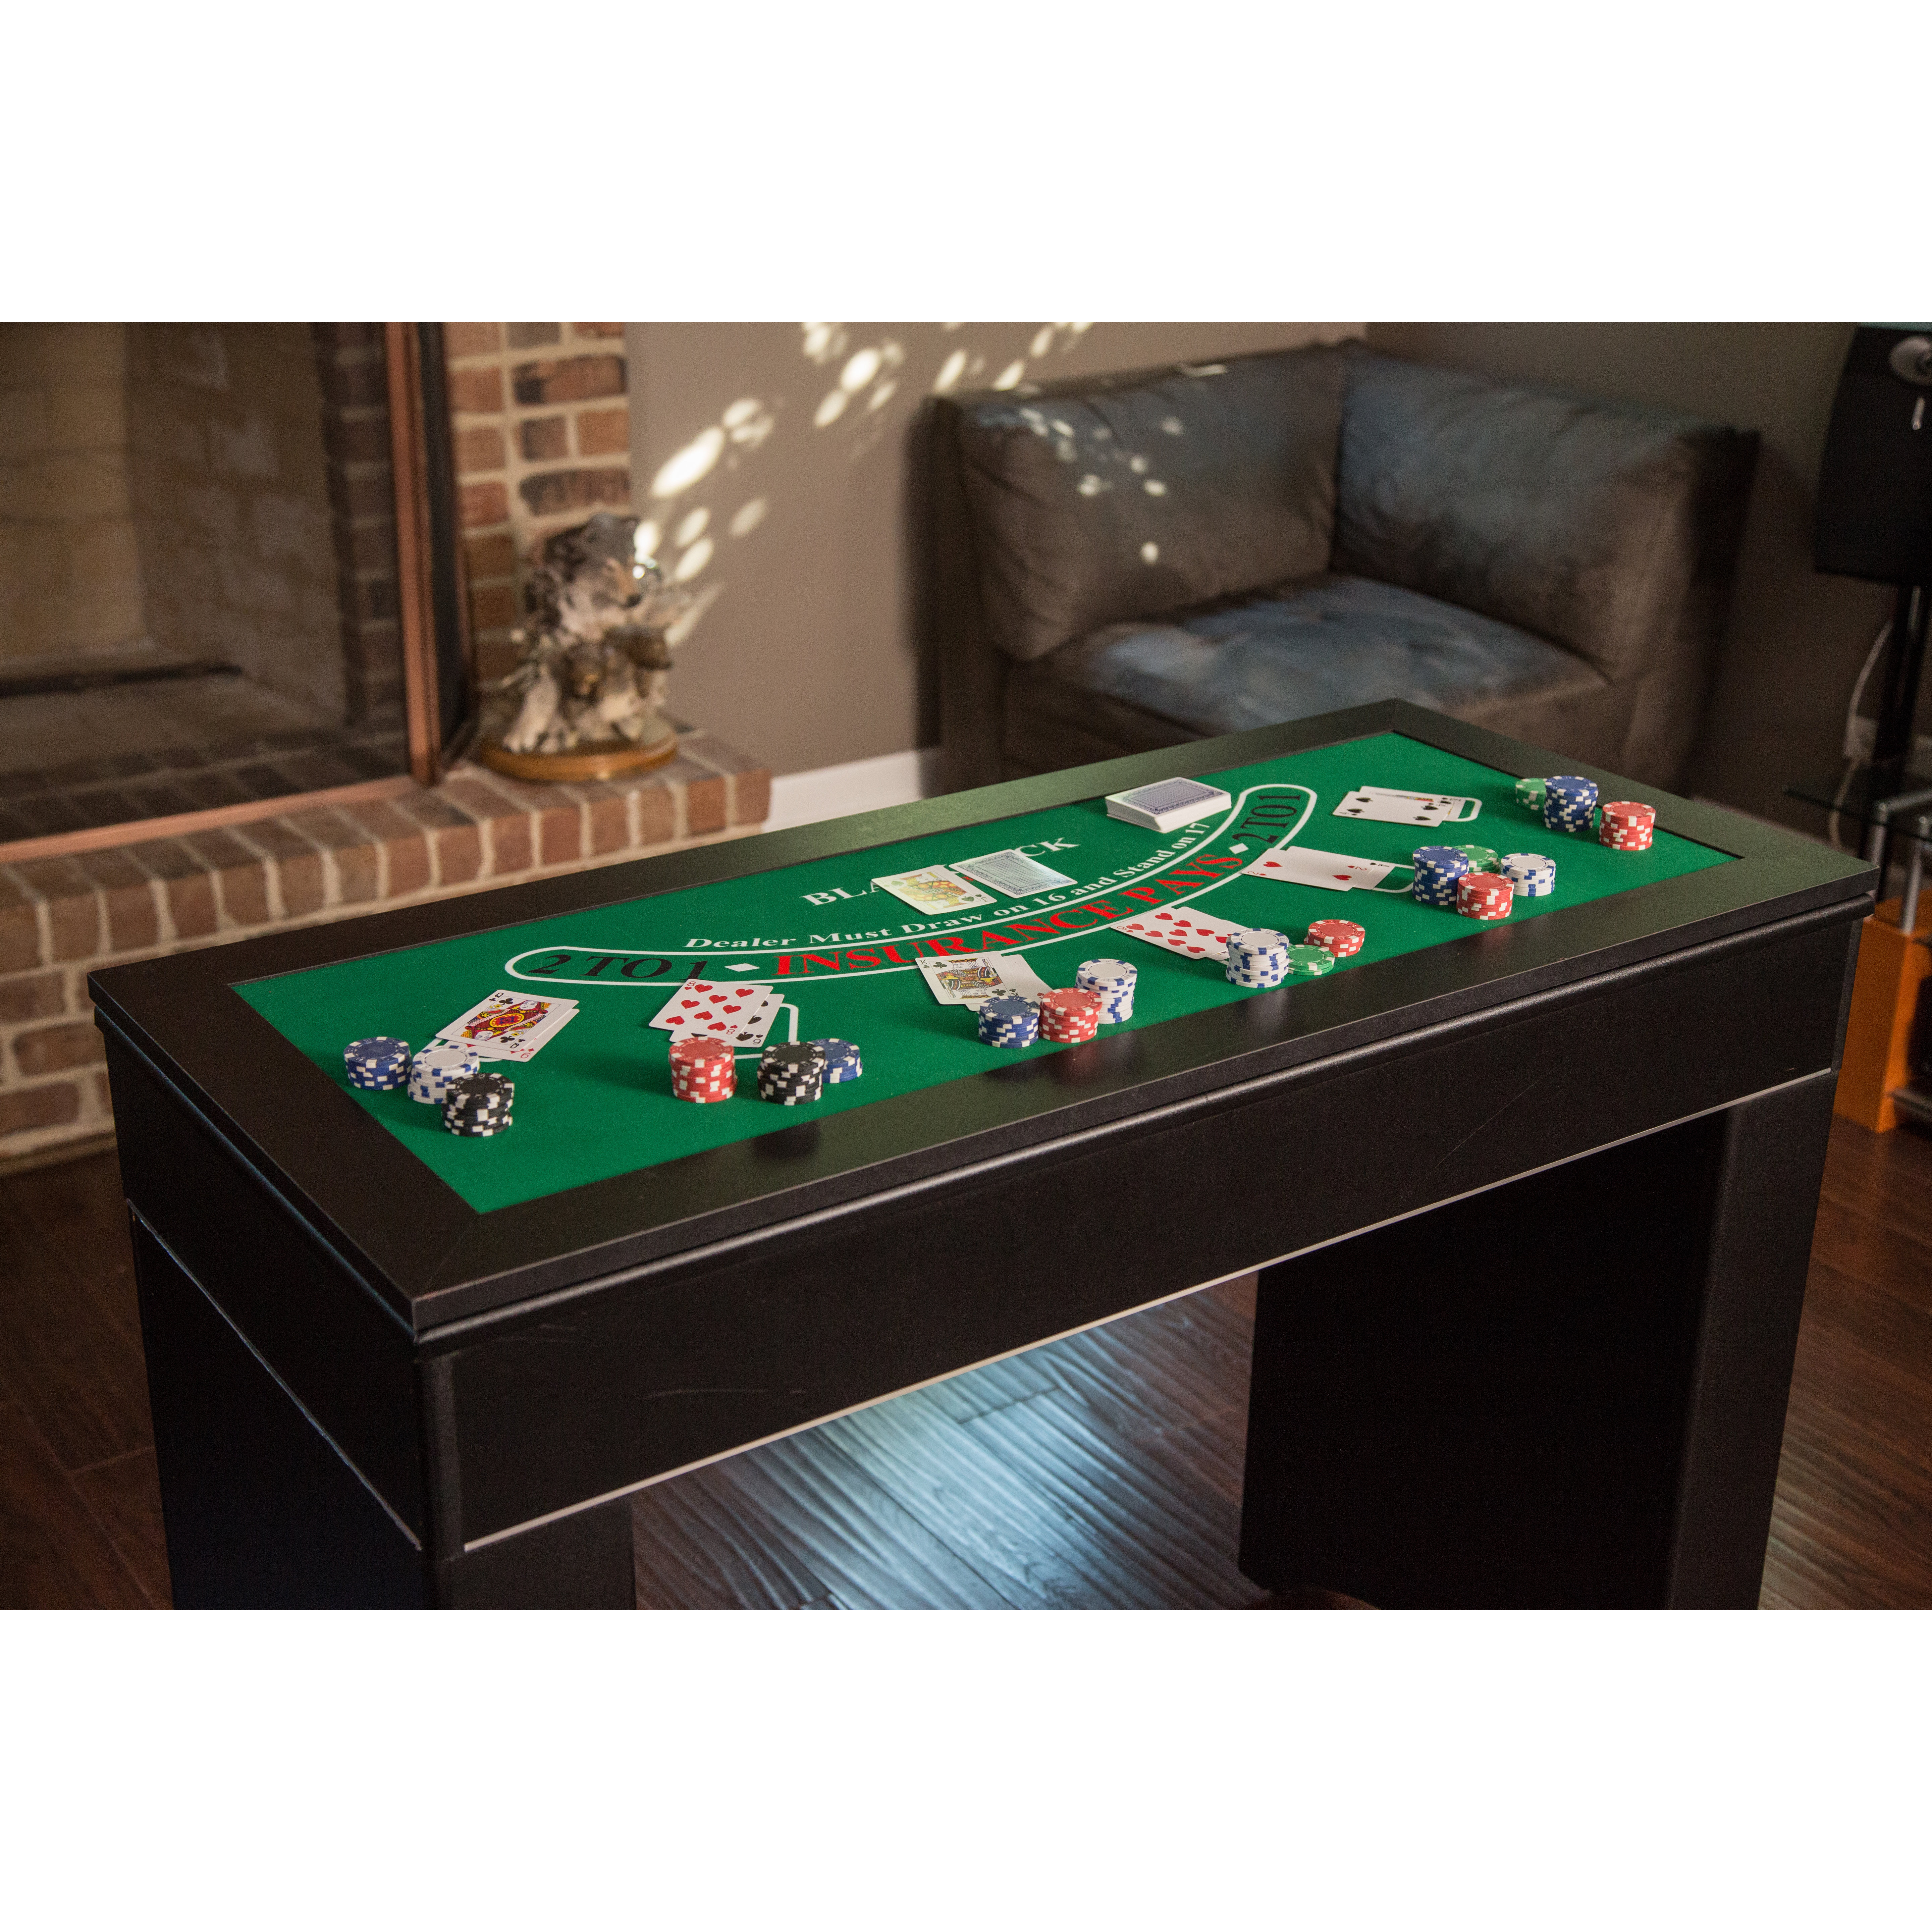 trial vaccination analog Hathaway Games 48" Monte Carlo Poker Table & Reviews | Wayfair